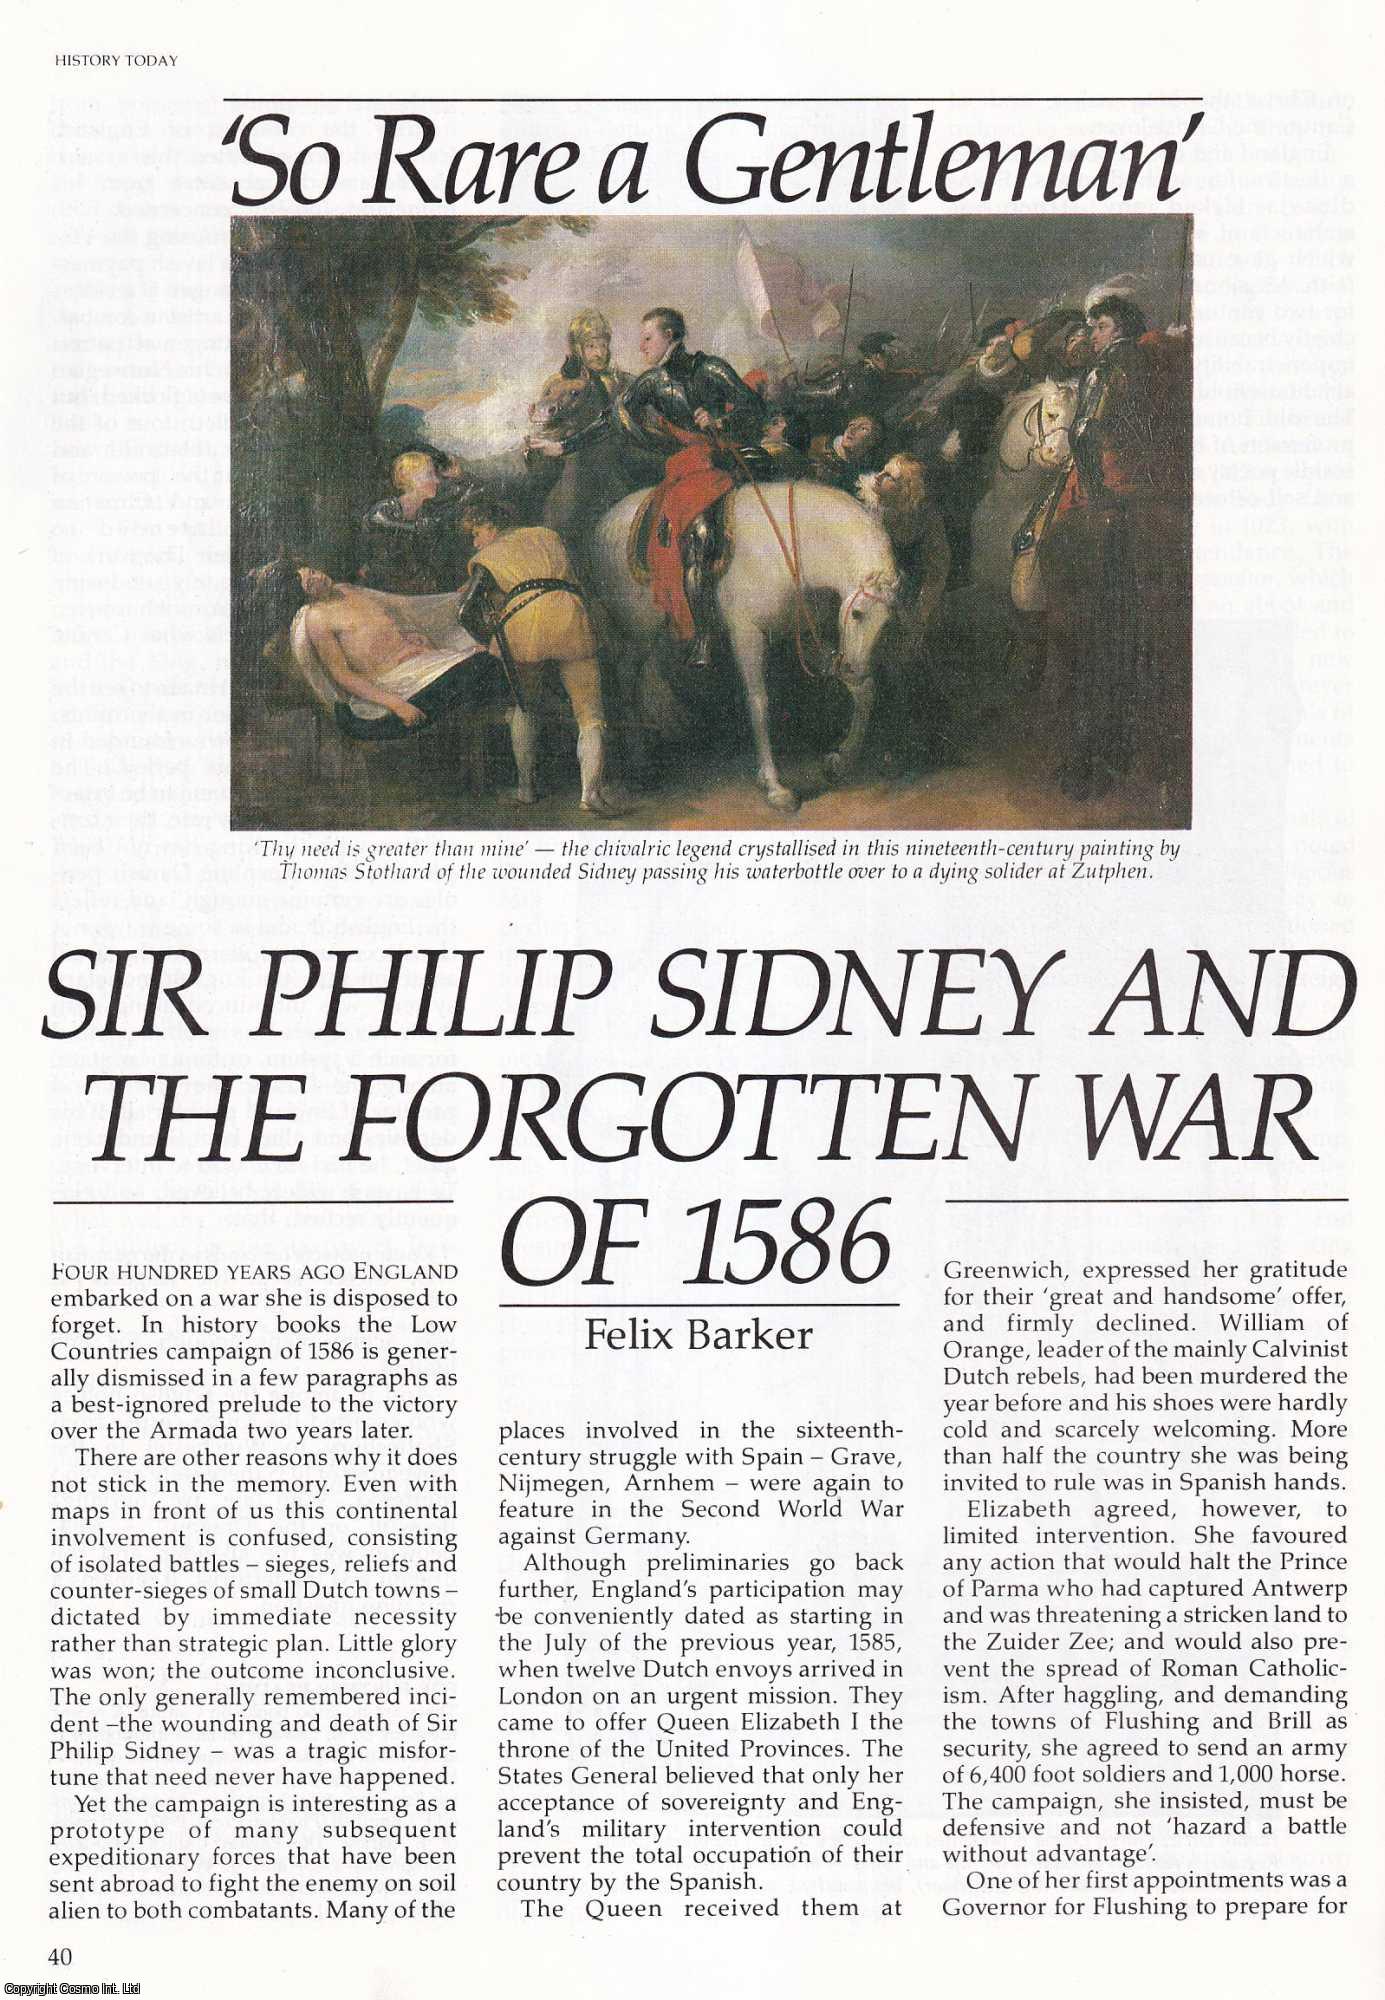 Felix Barker - So Rare a Gentleman': Sir Philip Sidney and the Forgotten War of 1586. An original article from History Today, 1986.